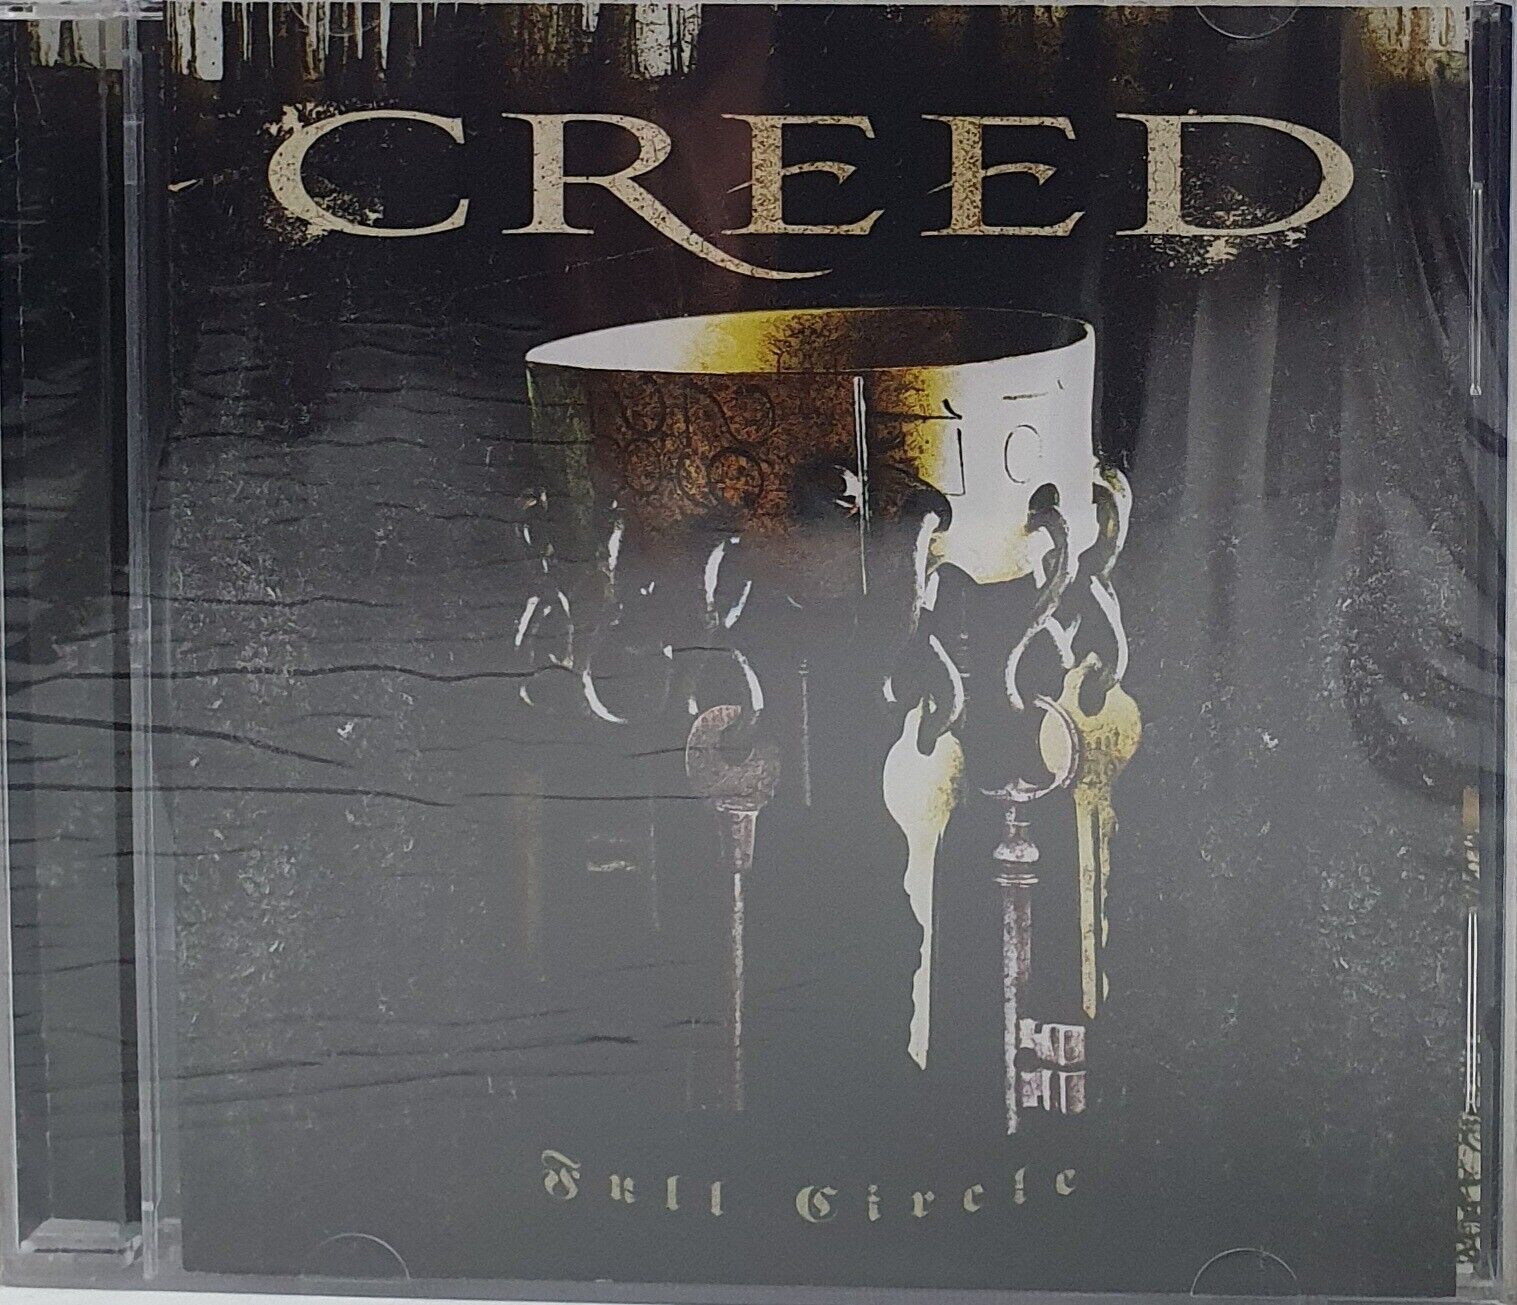 CREED - FULL CIRCLE (OFFICIAL UKRAINIAN RELEASE) CD New sealed